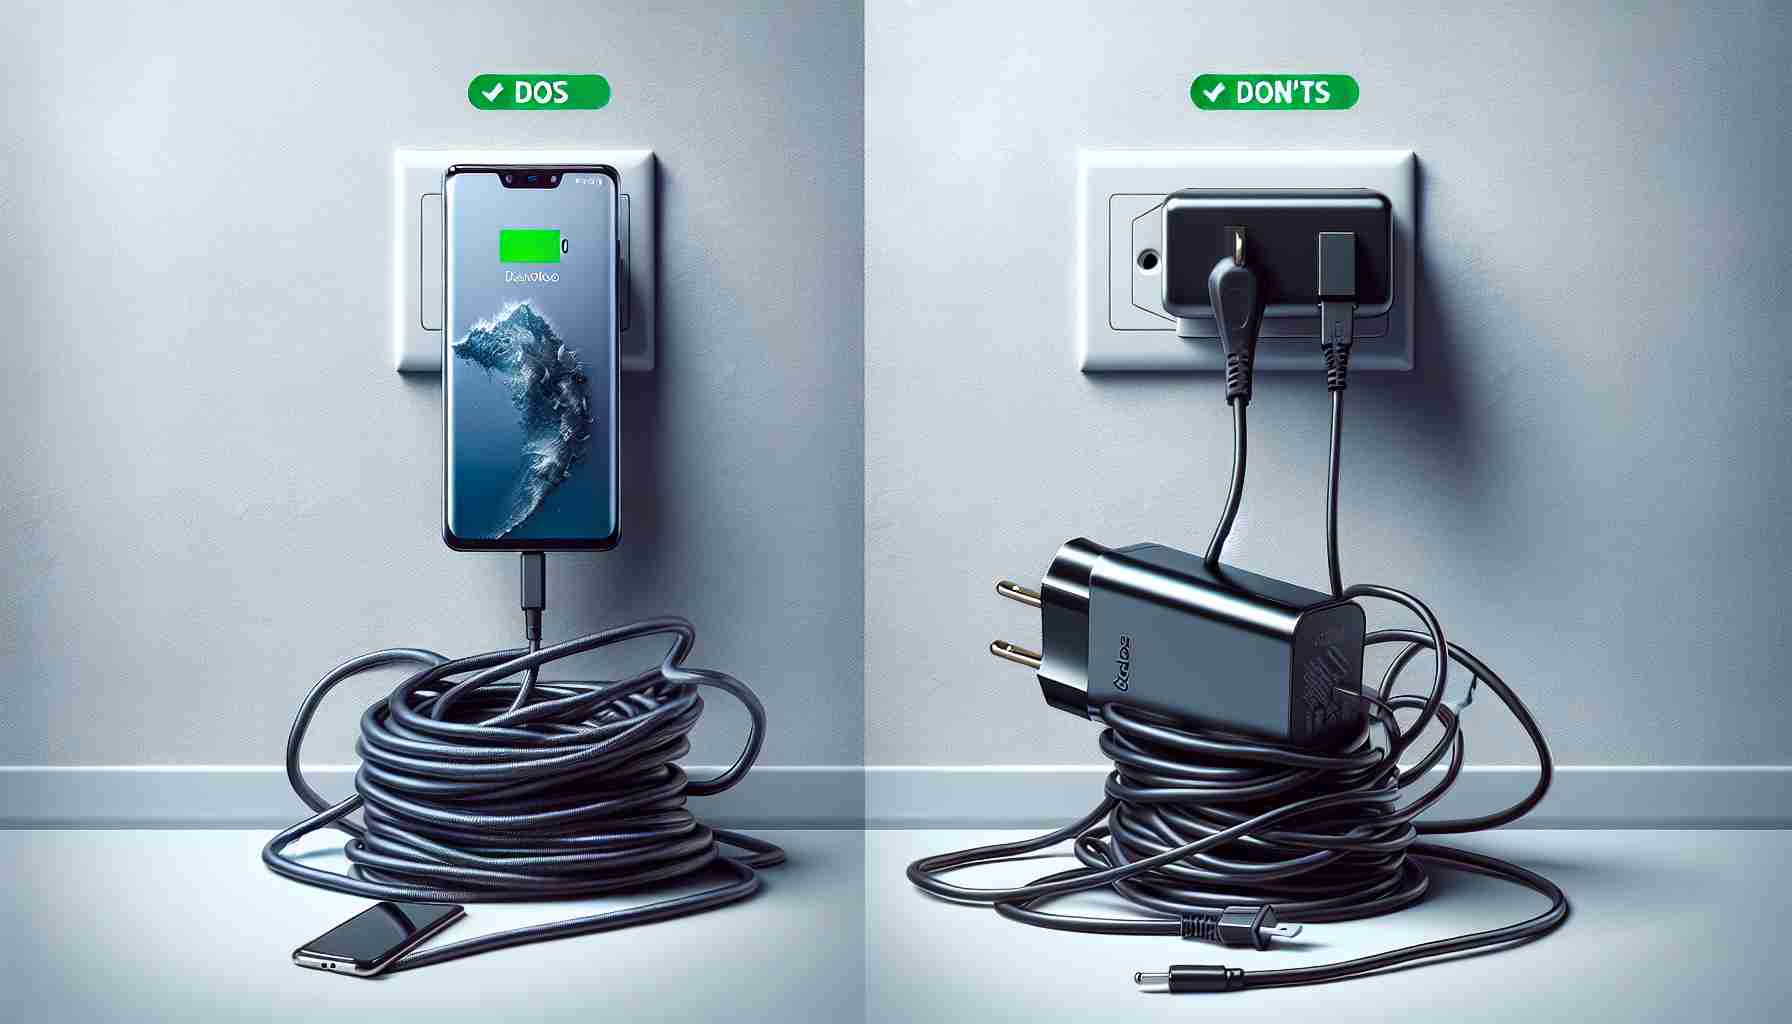 The Dos and Don’ts of Smartphone Charging